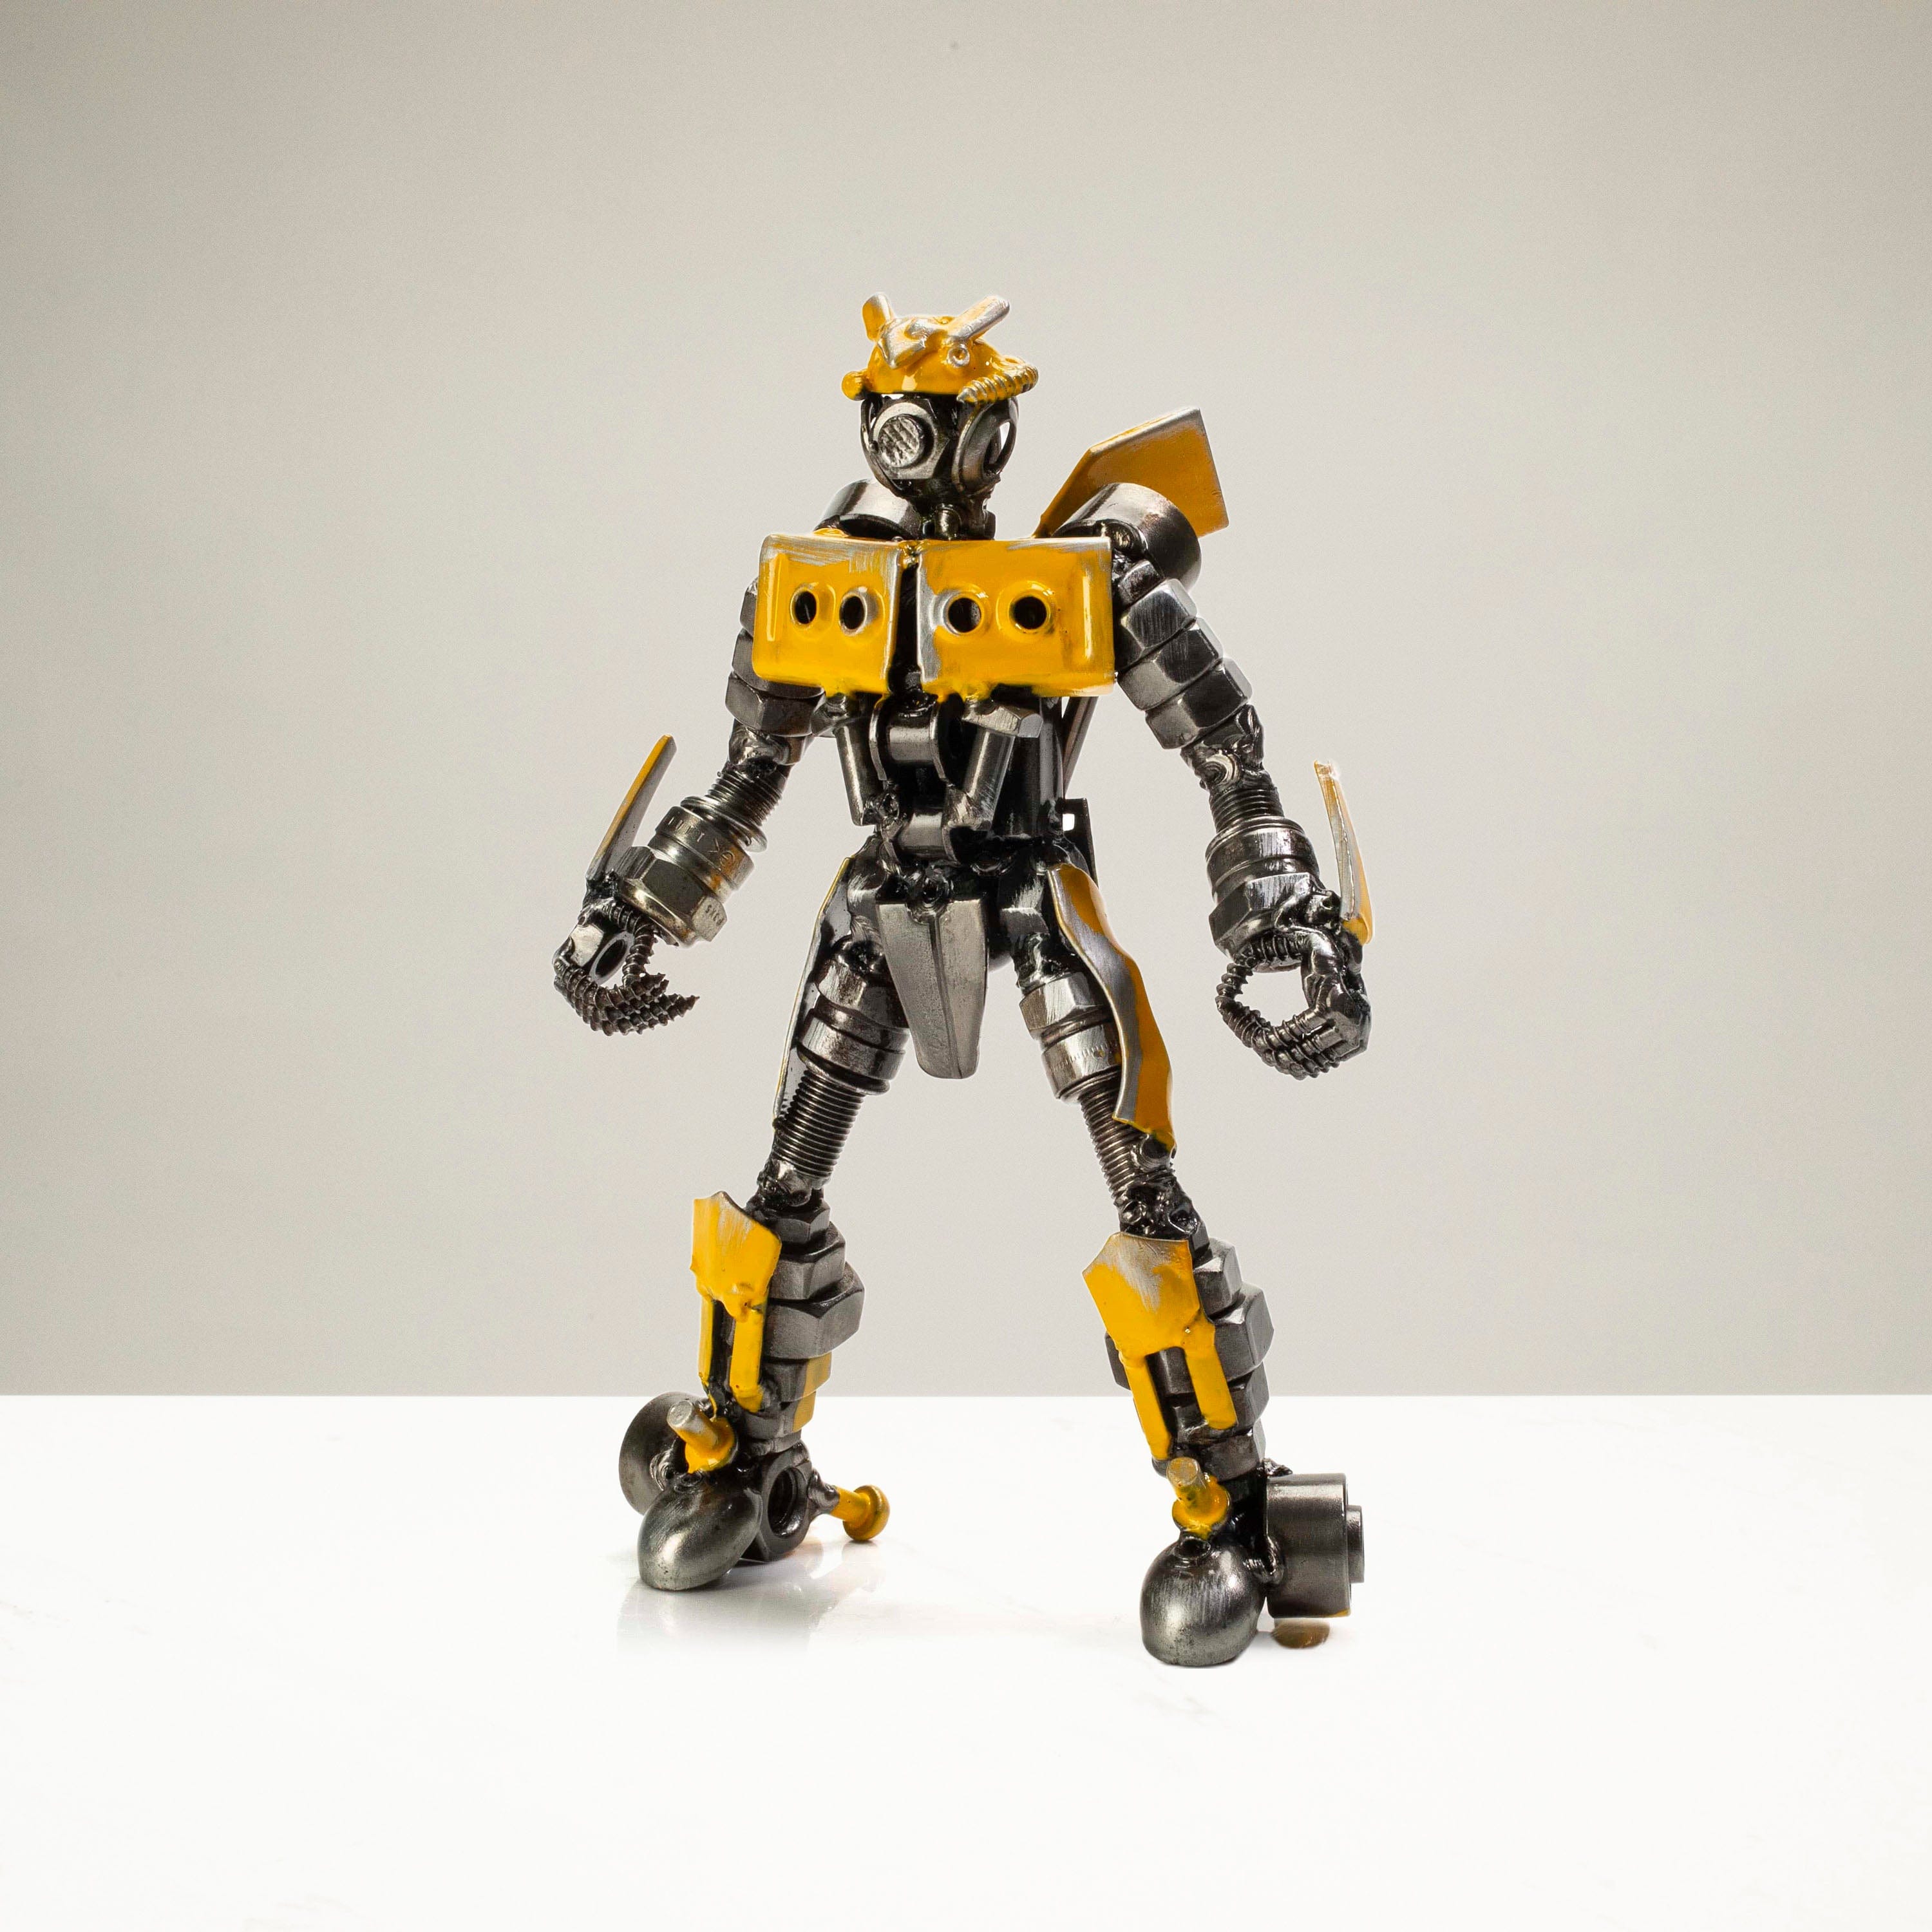 Kalifano Recycled Metal Art 7" Bumblebee Inspired Recycled Metal Sculpture RMS-450BBA-N